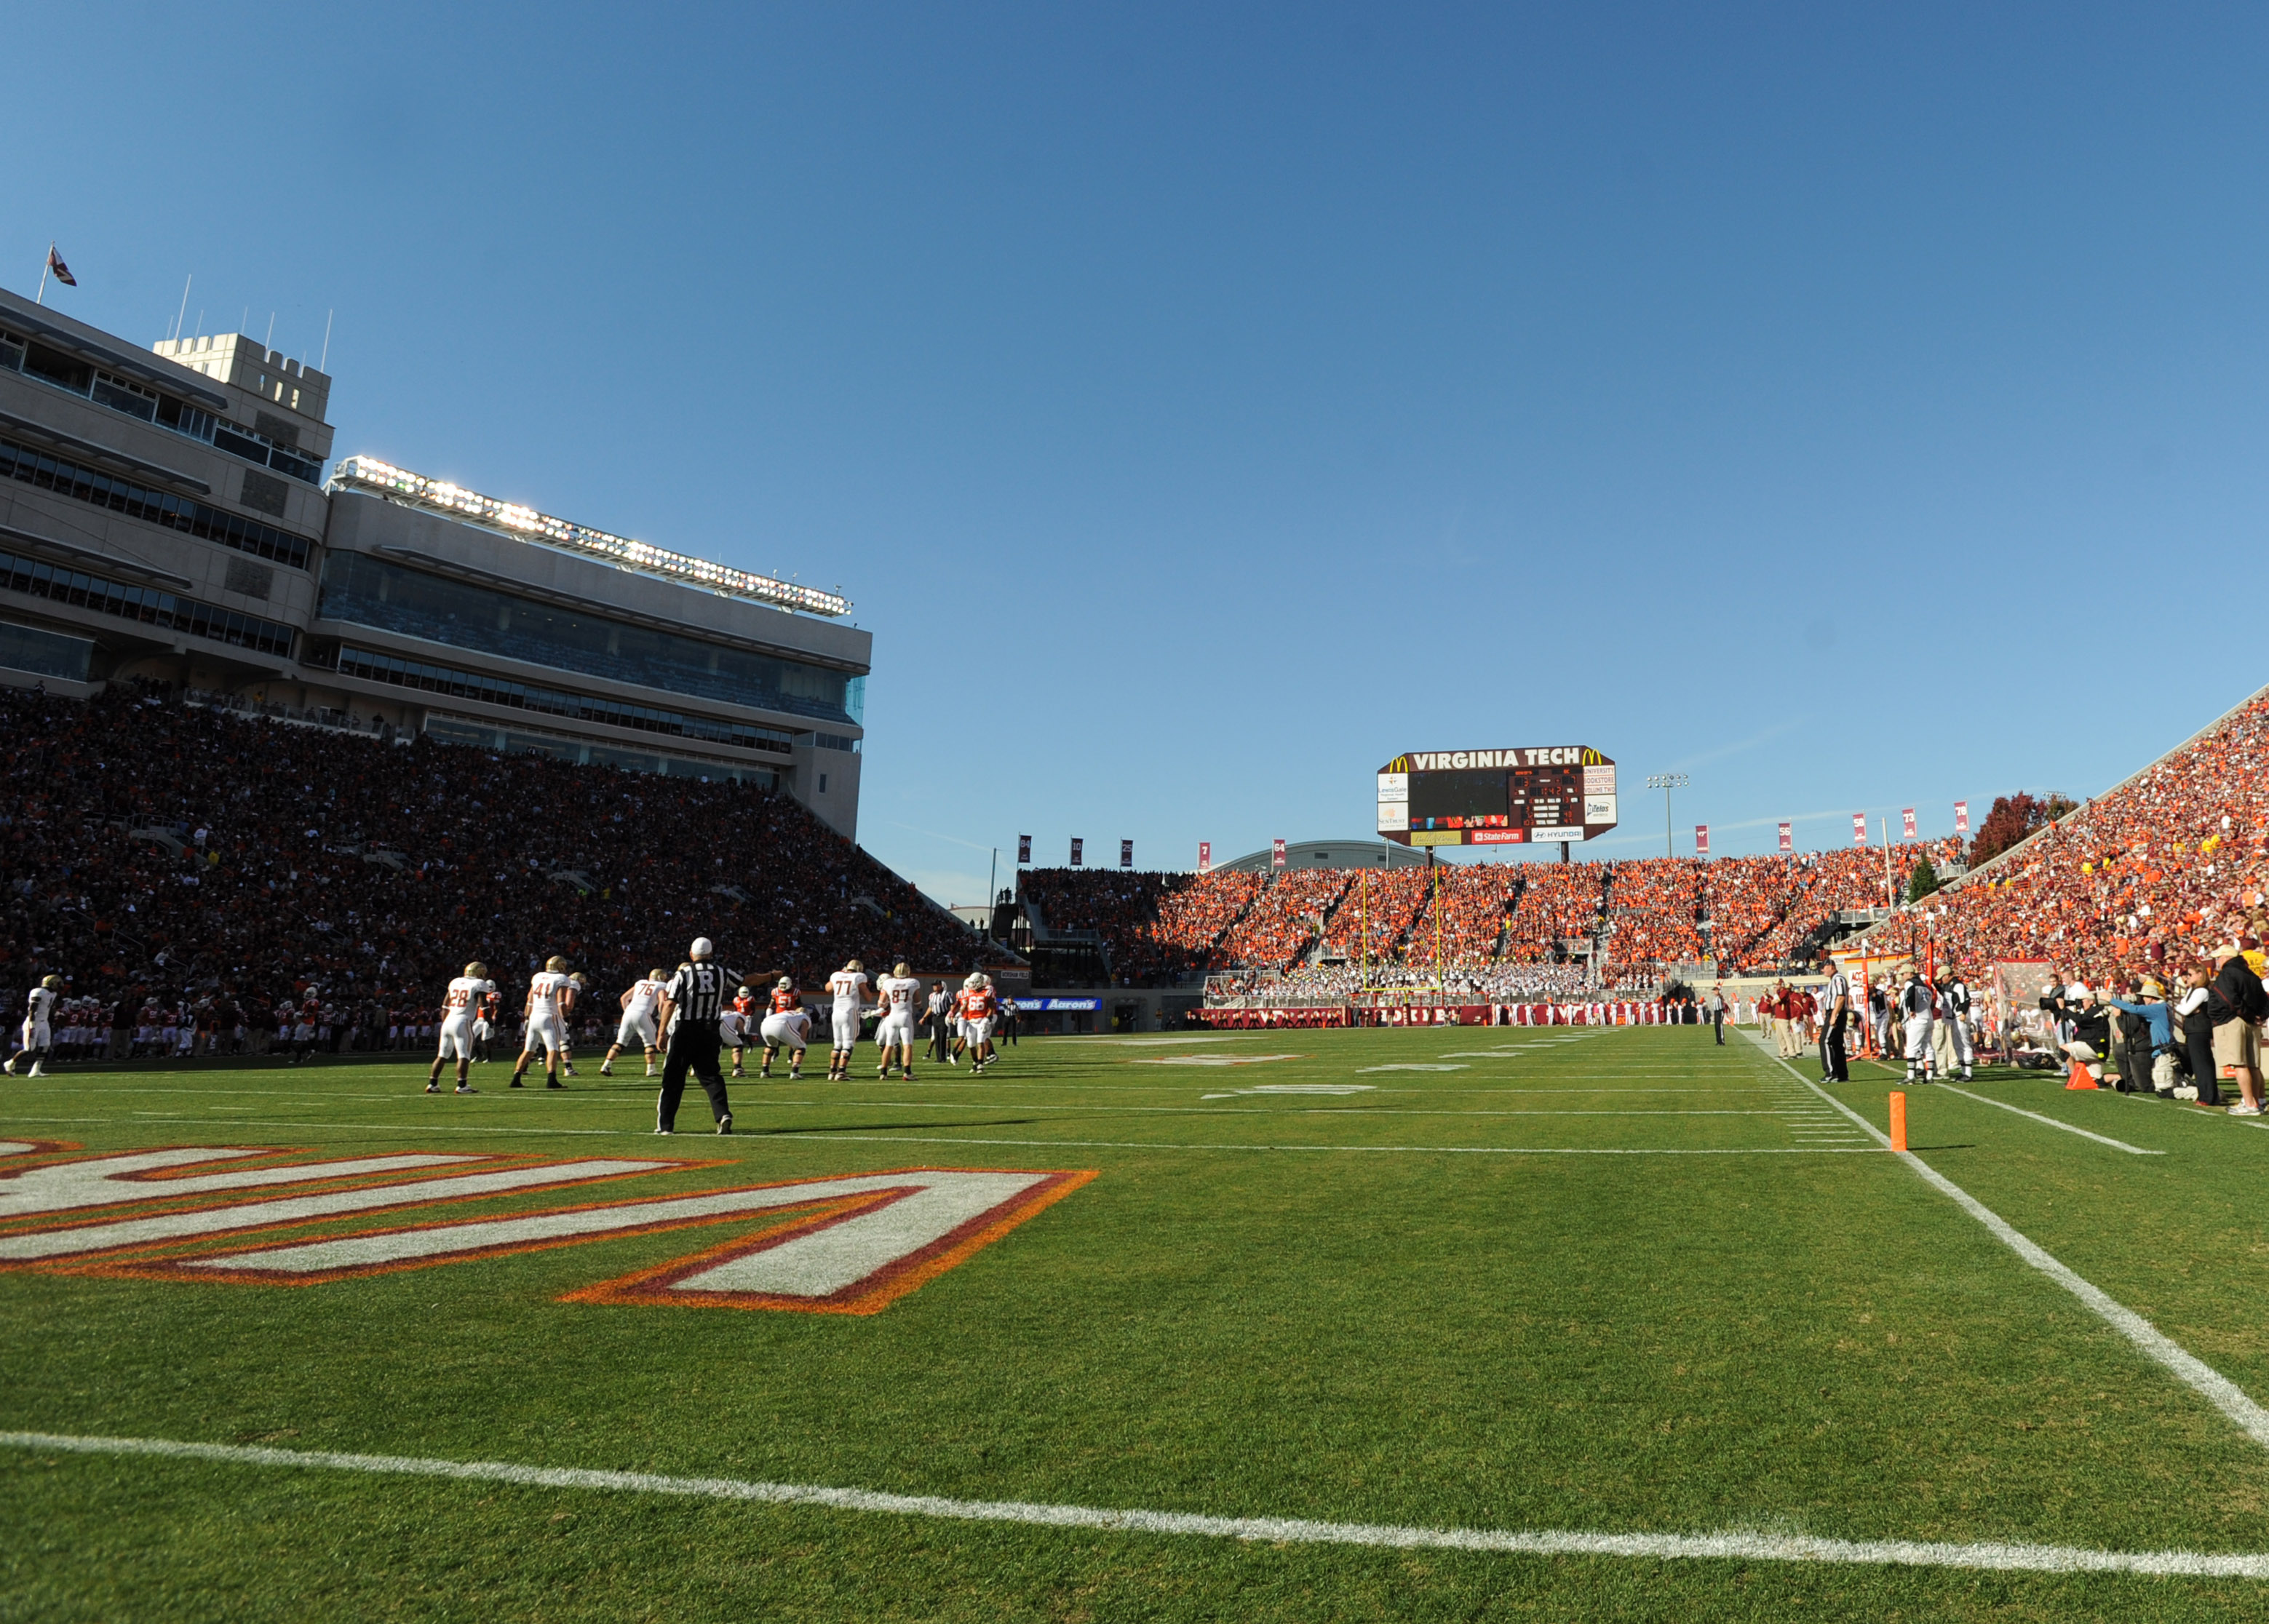 The football field surface at Virginia Tech is due to research by turfgrass specialists. 